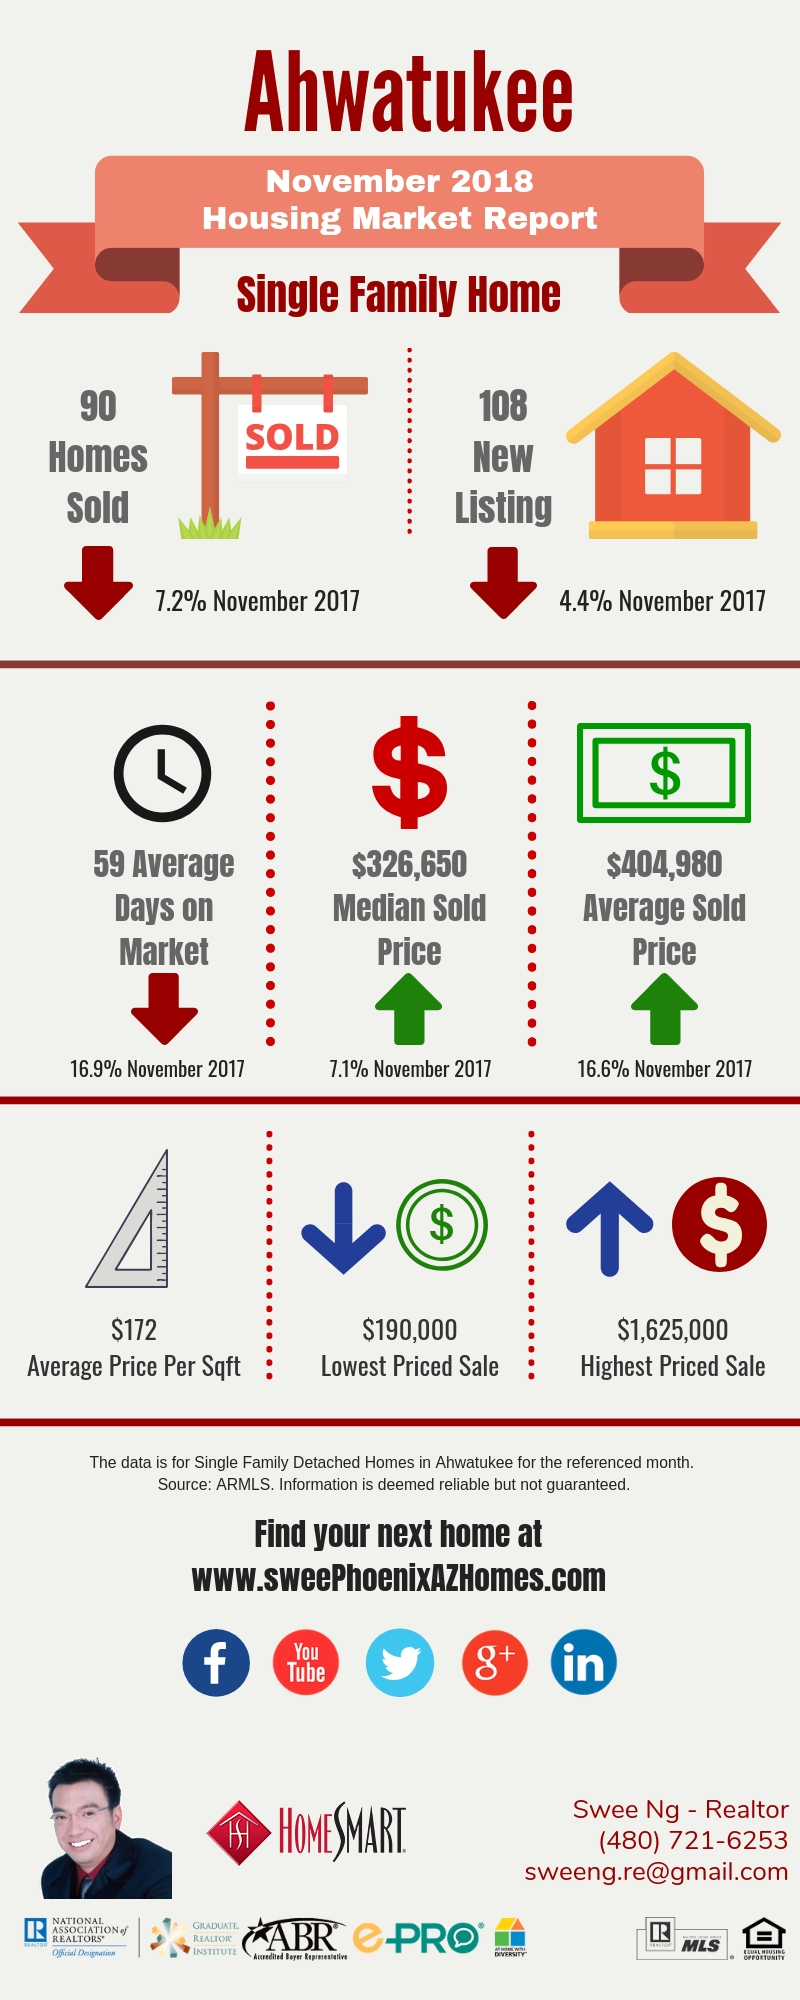 Ahwatukee Housing Market Trends Report November 2018, House Value, Real Estate and Statistic by Swee Ng